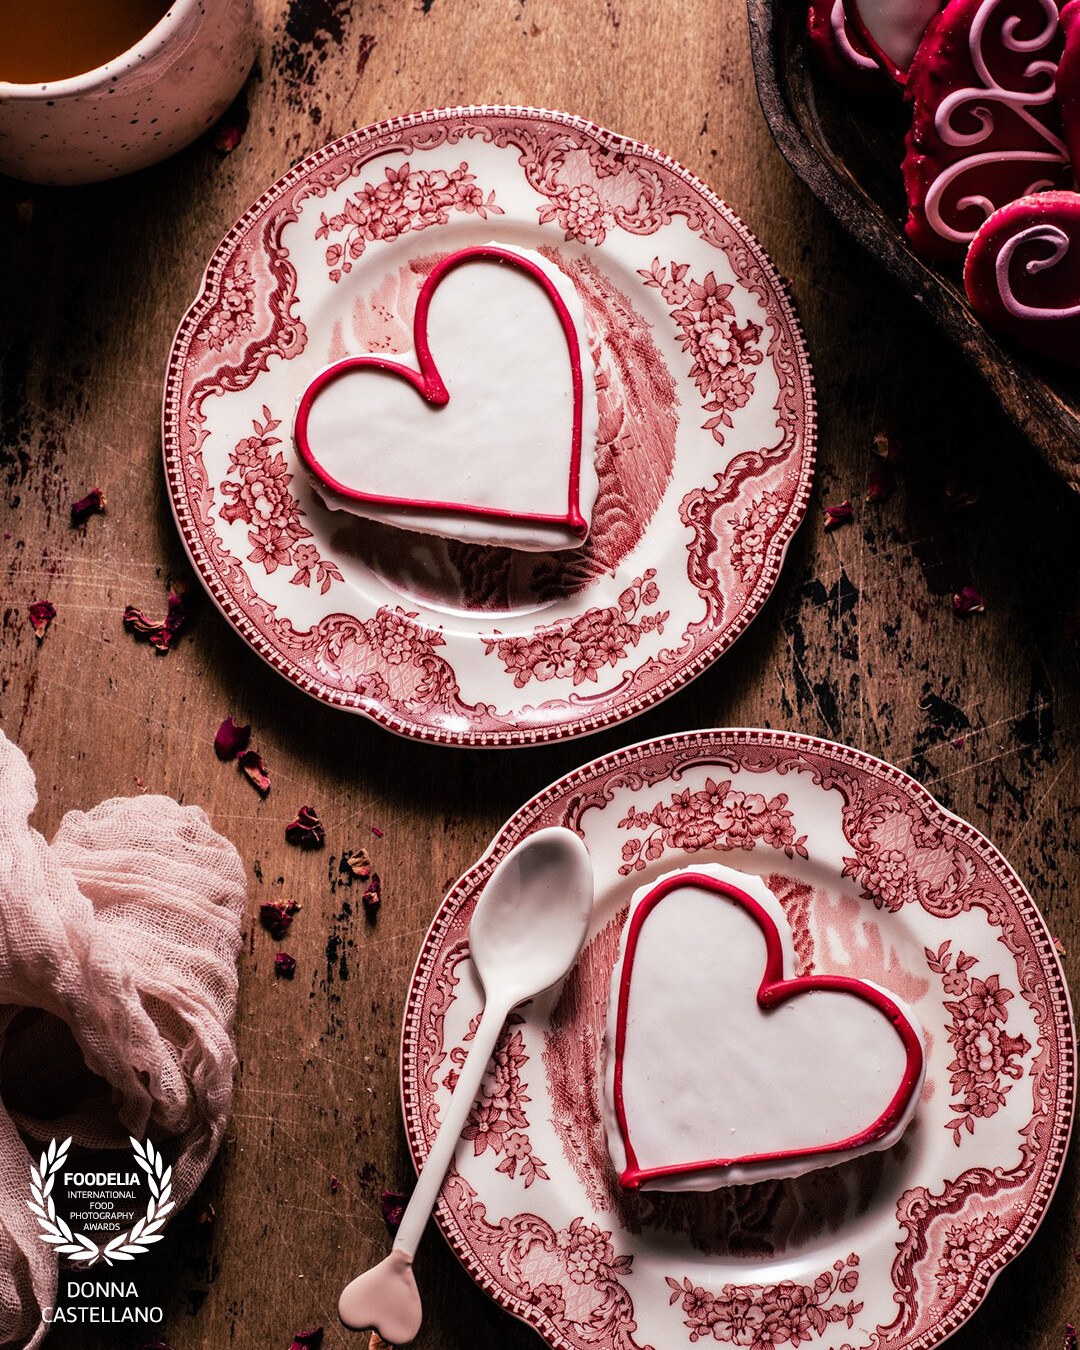 Food always has a way of capturing someone's heart.